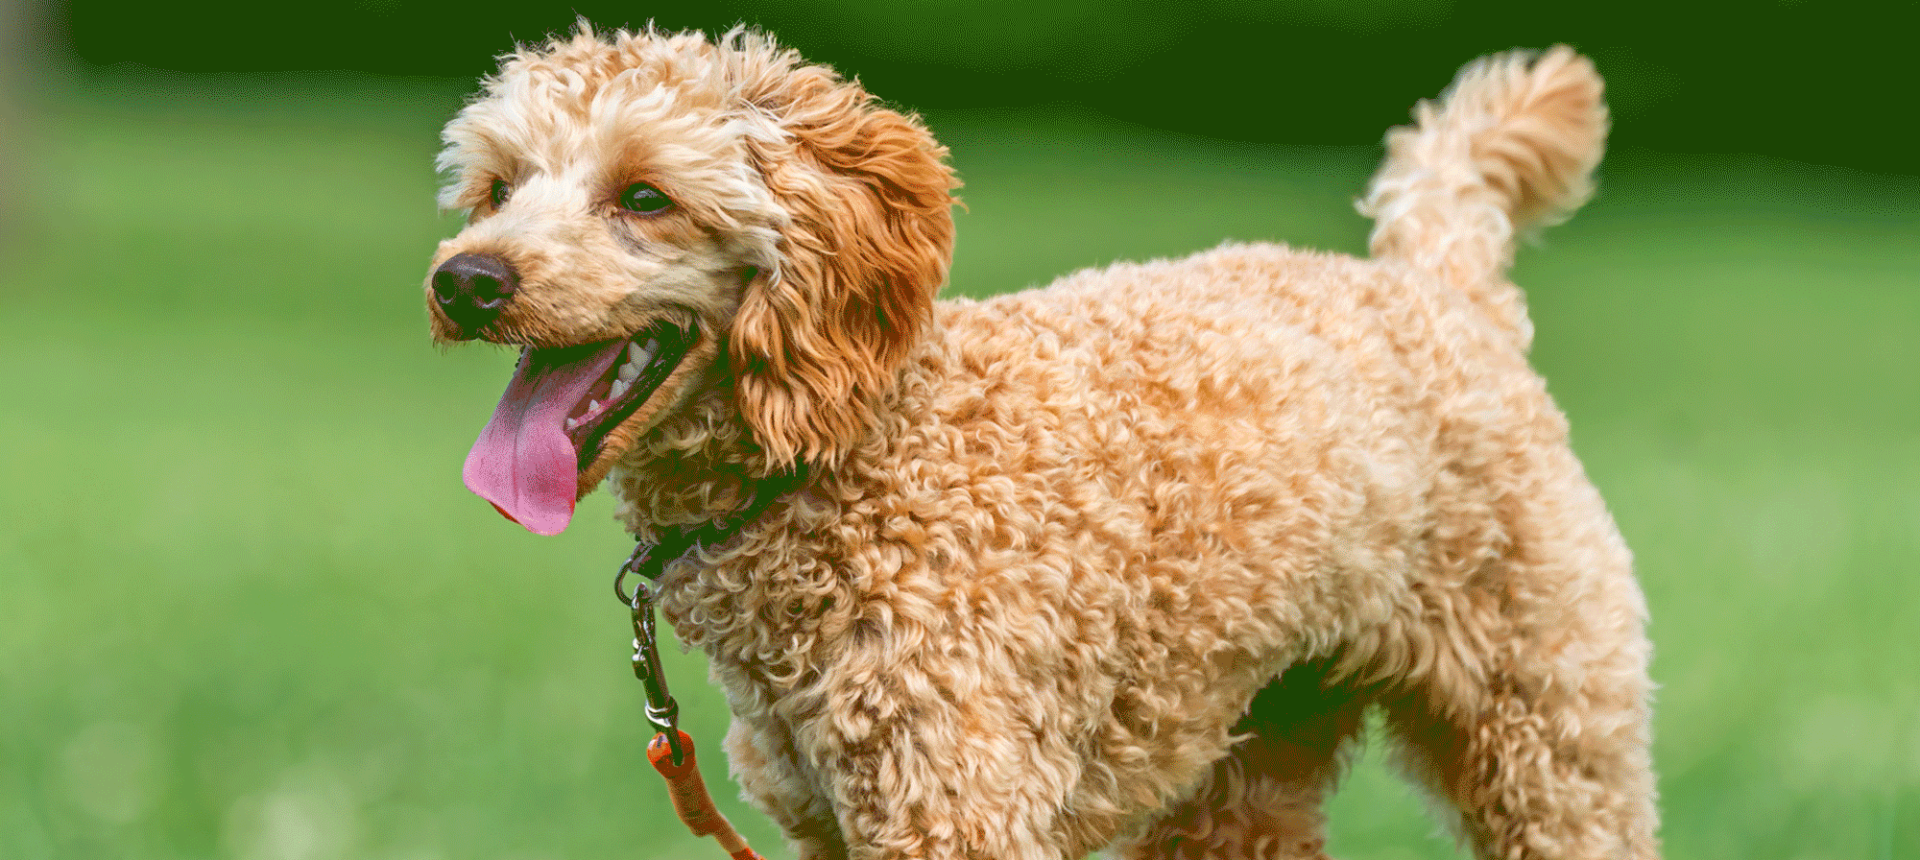 a close up image of a poodle walking through the grass with its tongue hanging out of its mouth